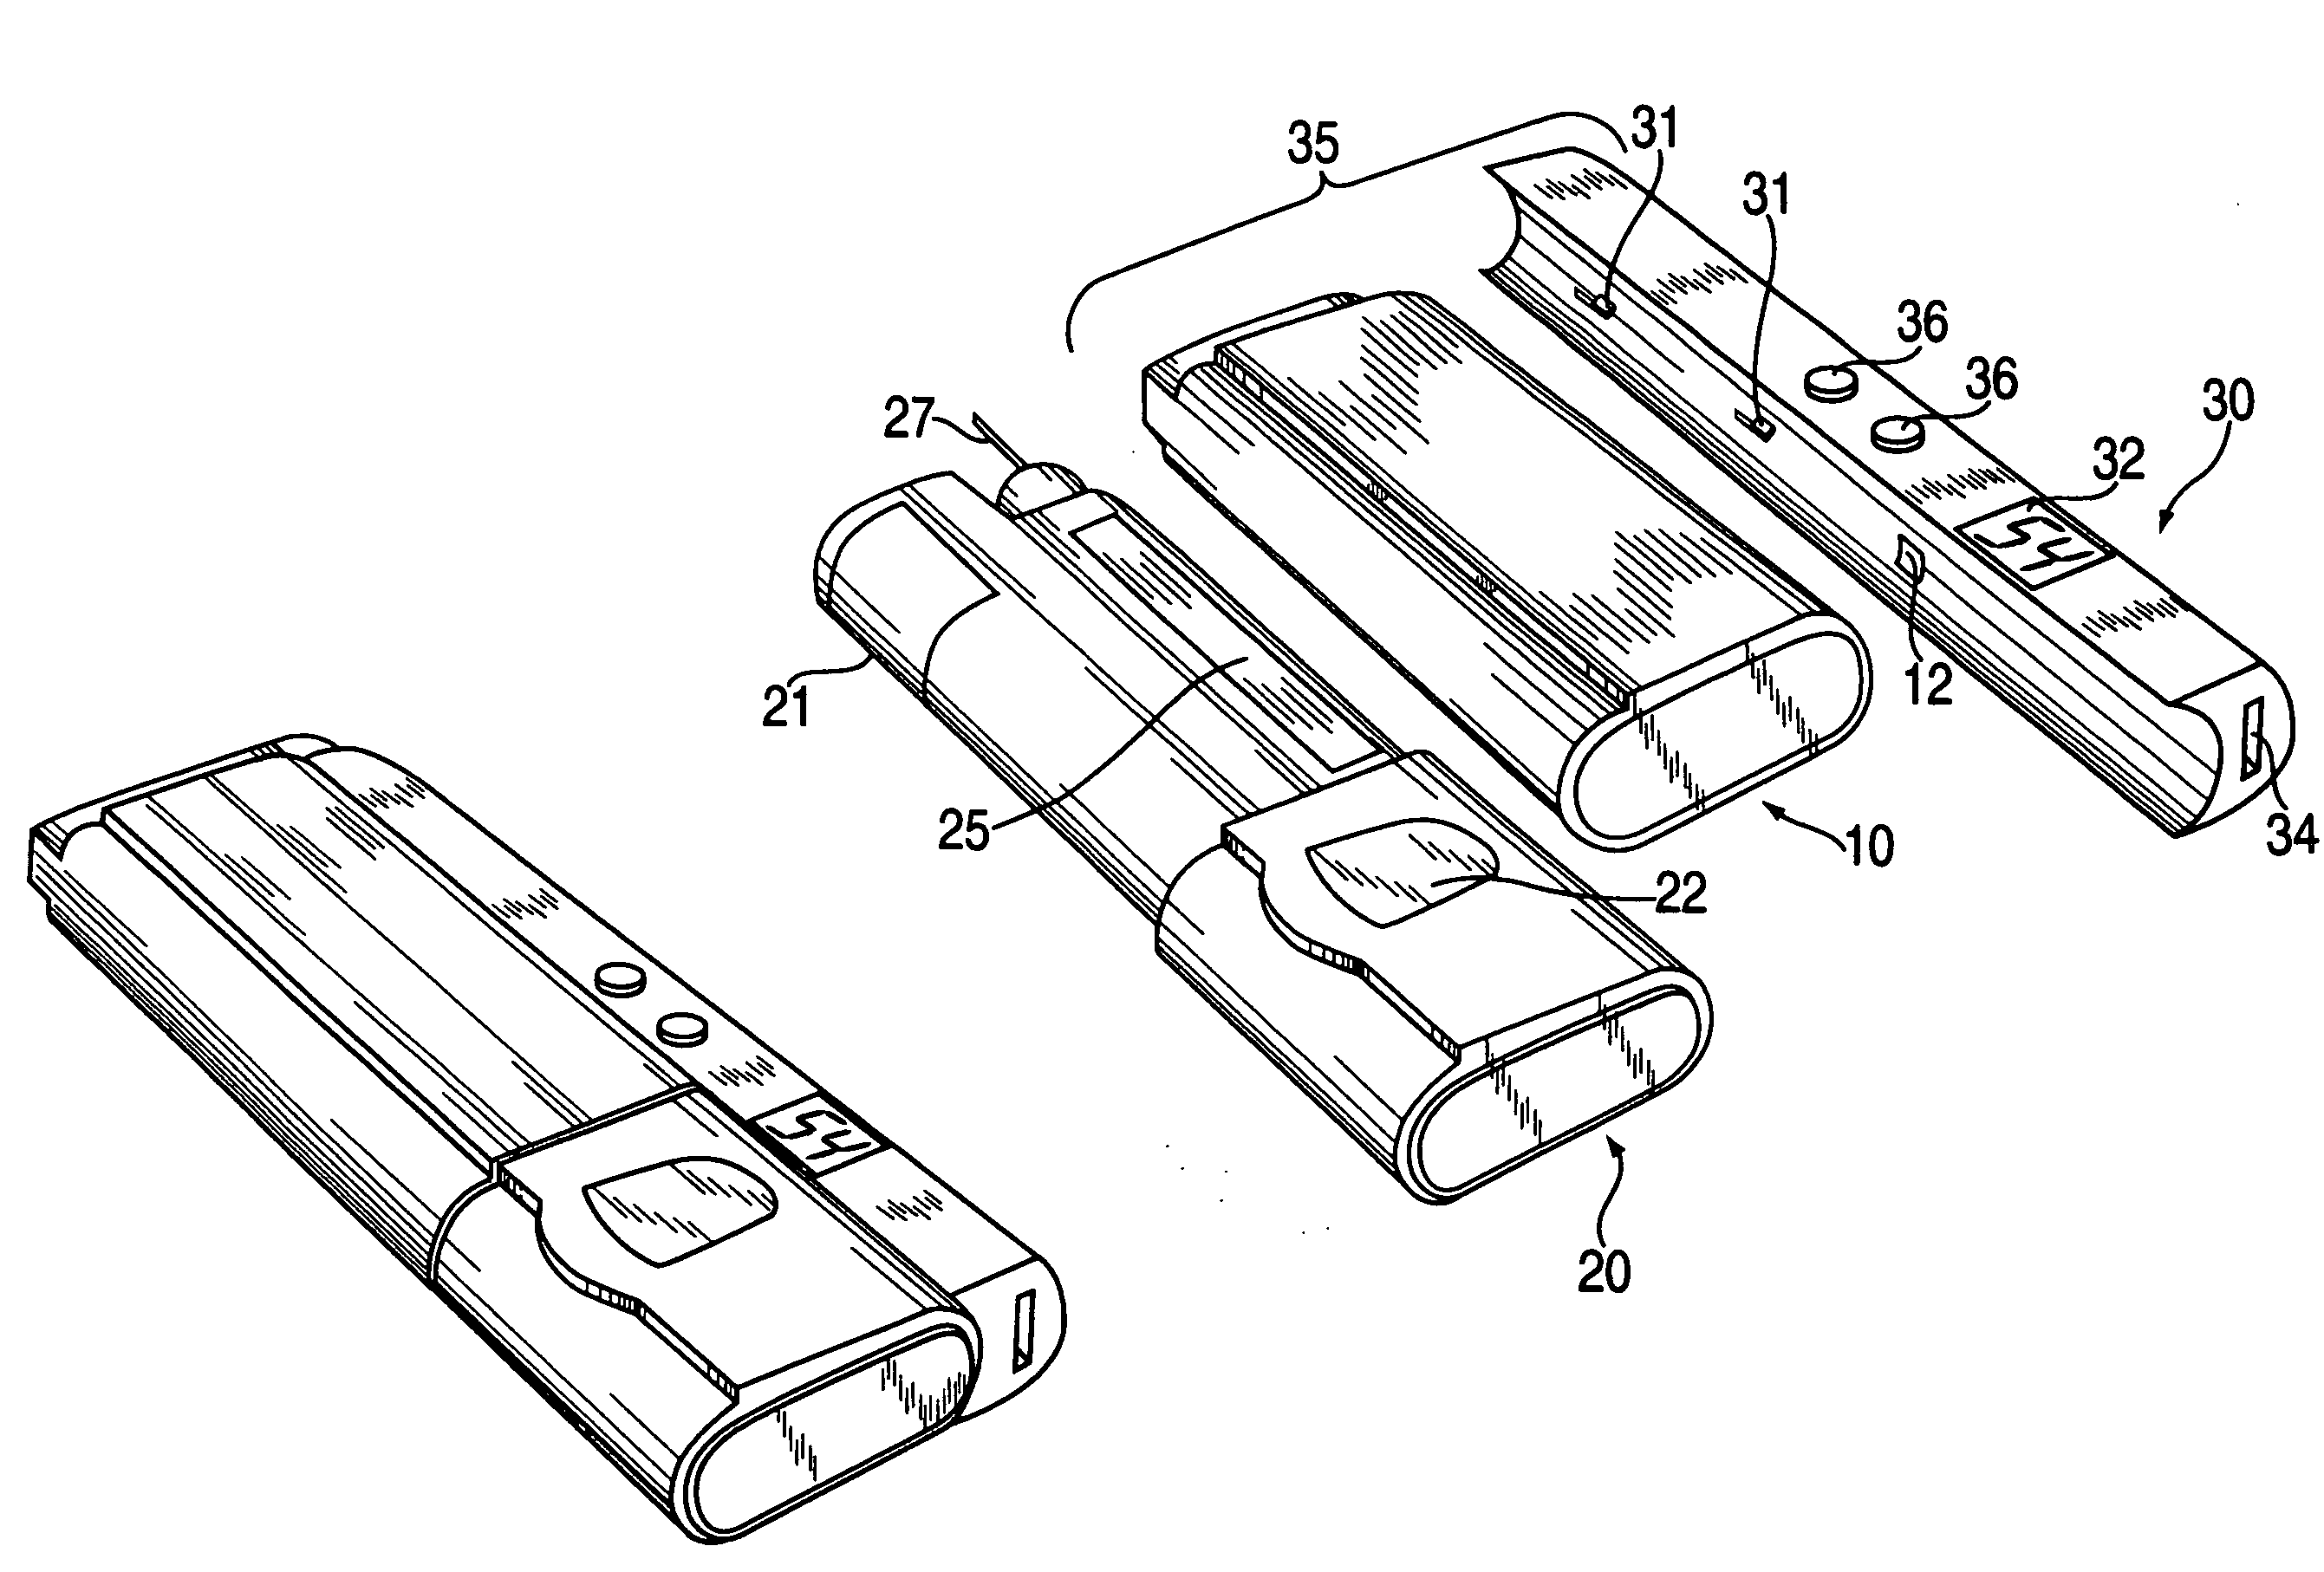 Medical apparatus for use by a patient for medical self treatment of diabetes